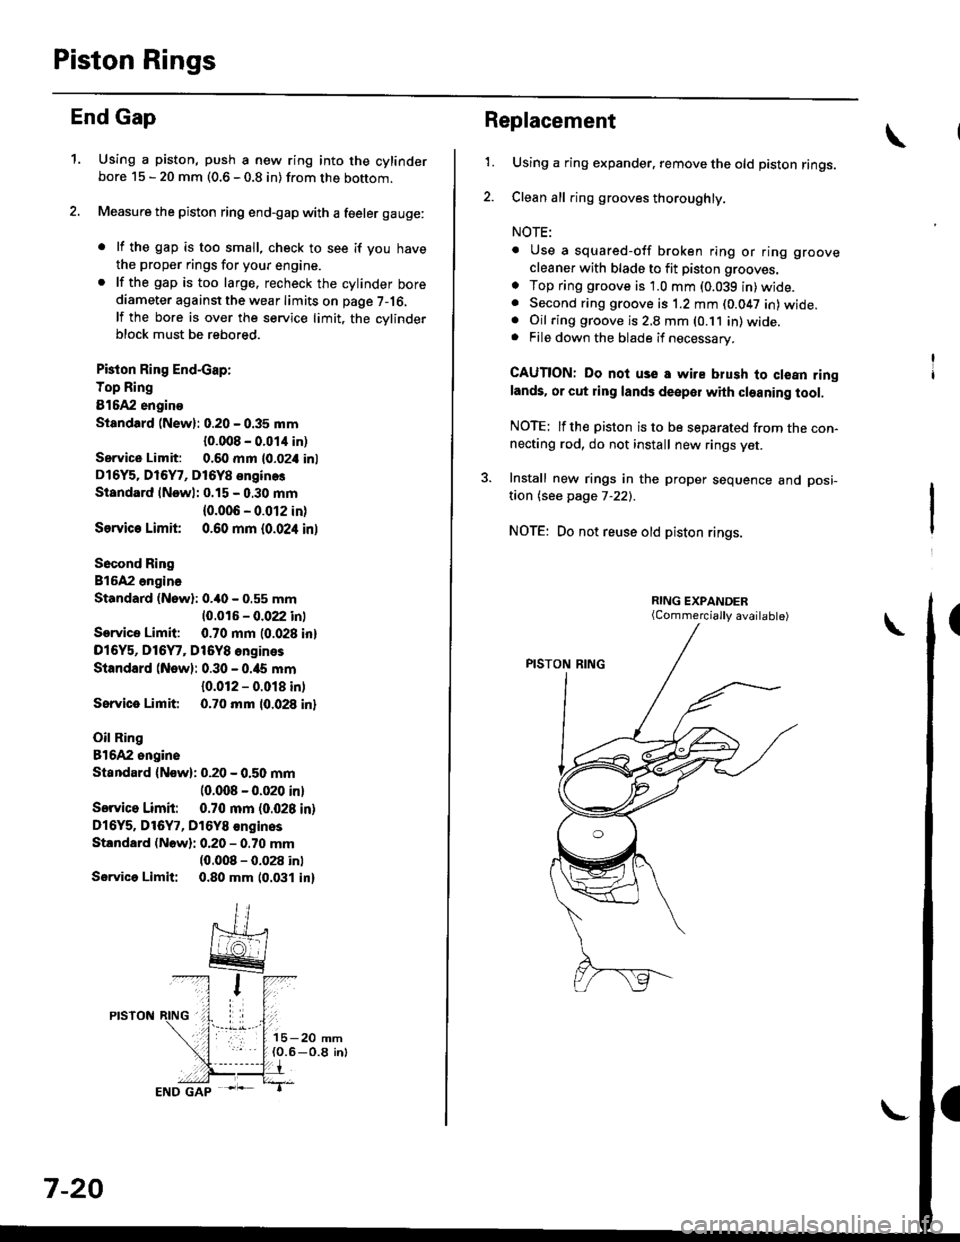 HONDA CIVIC 1996 6.G Workshop Manual Piston Rings
End Gap
1.Using a piston, push a new ring into the cylinderbore 15 - 20 mm (0.6 - 0.8 in) from the bottom.
Measure the piston ring end-gap with a feeler gauge:
. lf the gap is too small, 